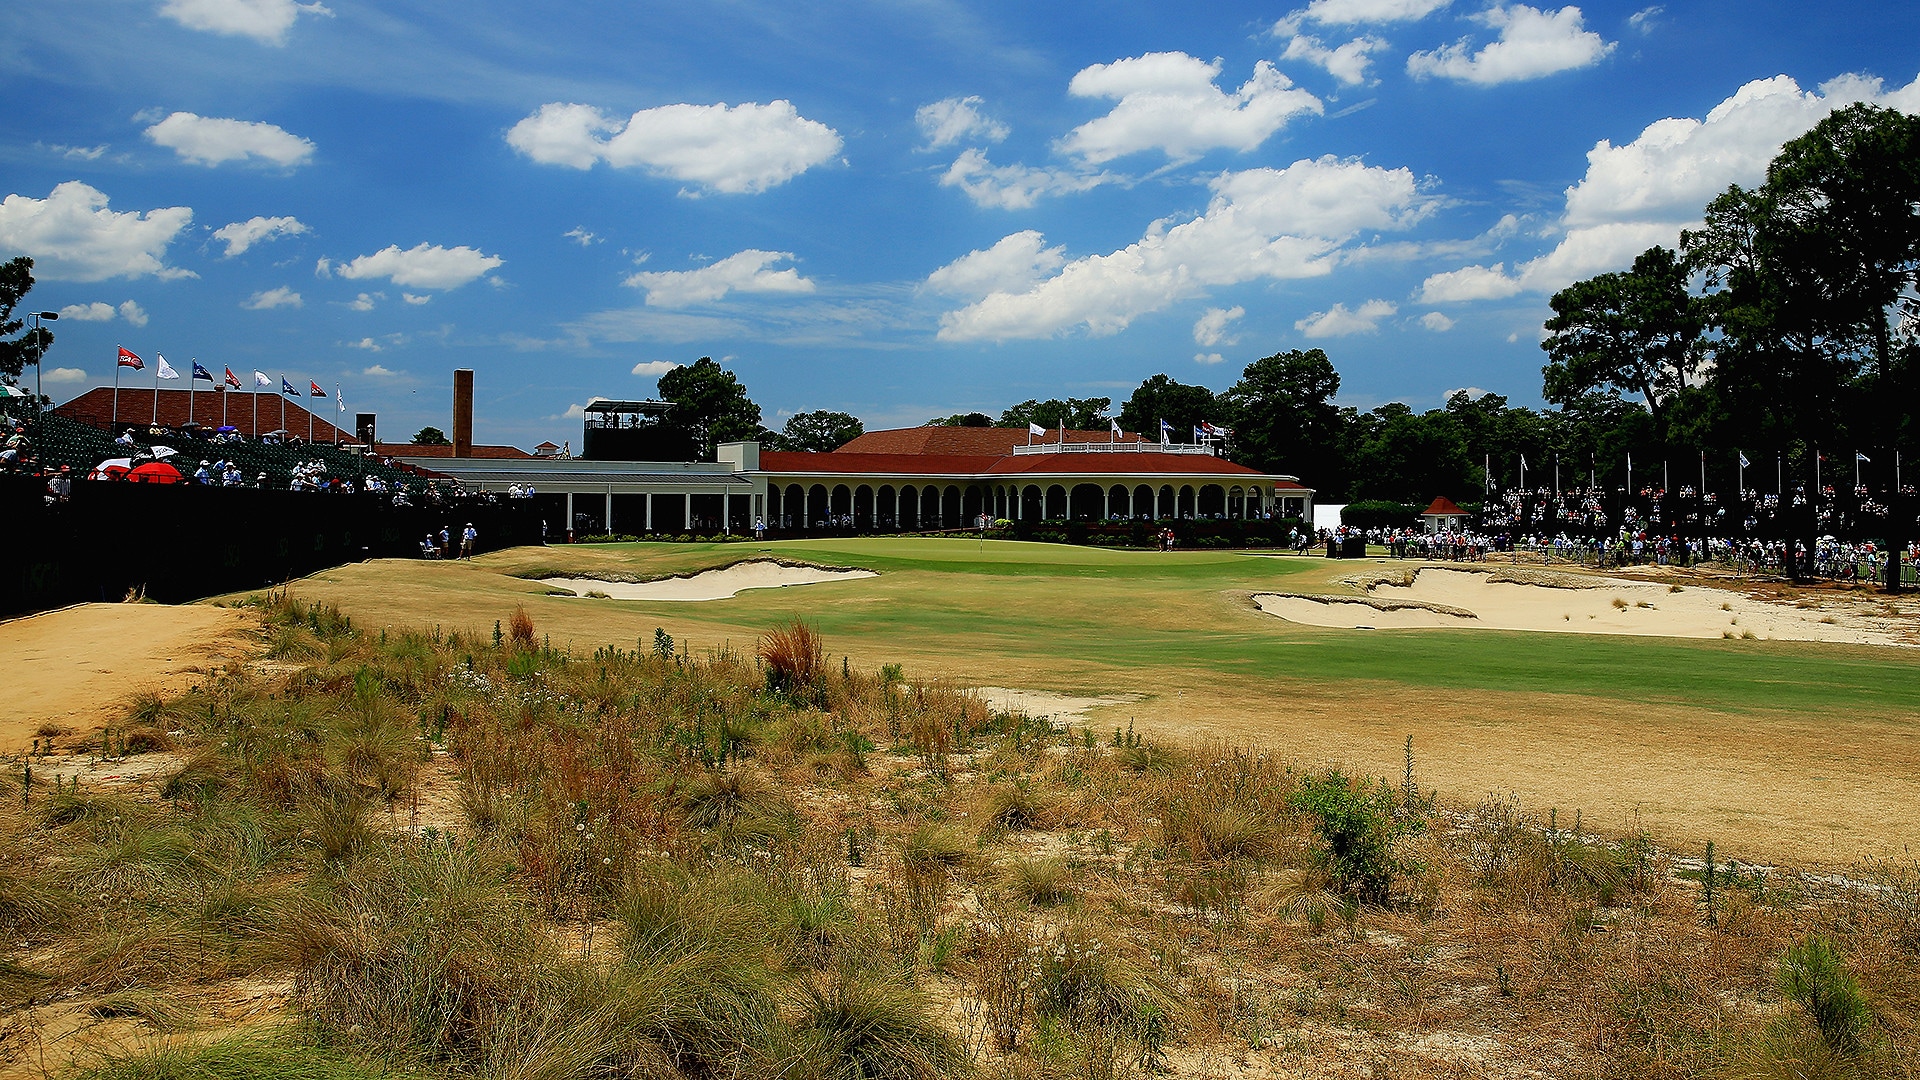 Power substation attacks force Pinehurst to close clubhouse, leave resort with limited power